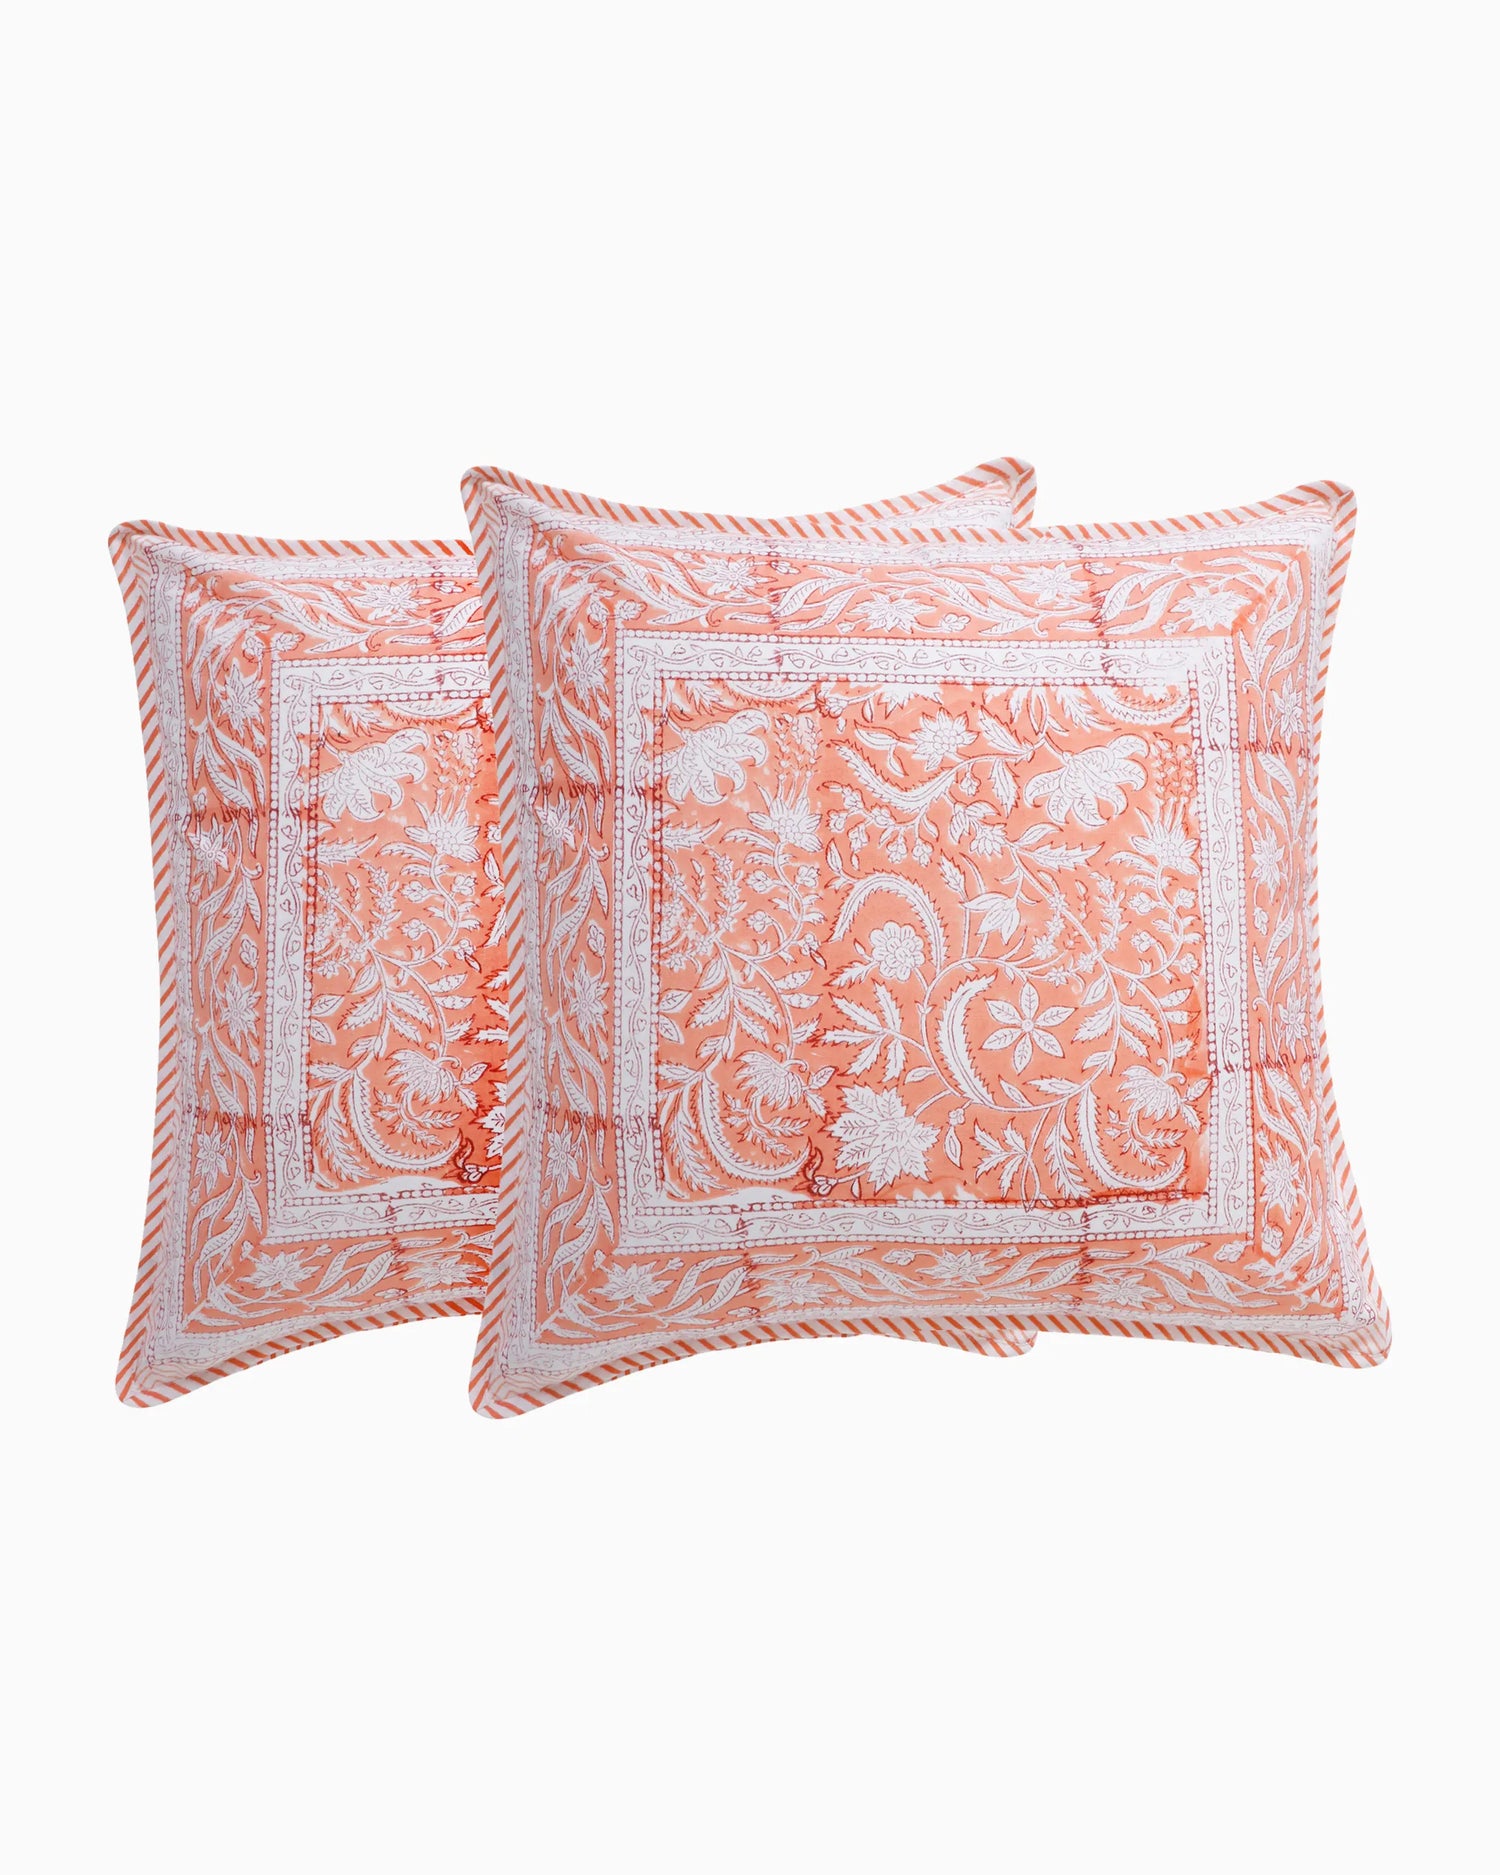 Ash Pillow Cover (Set of 2)